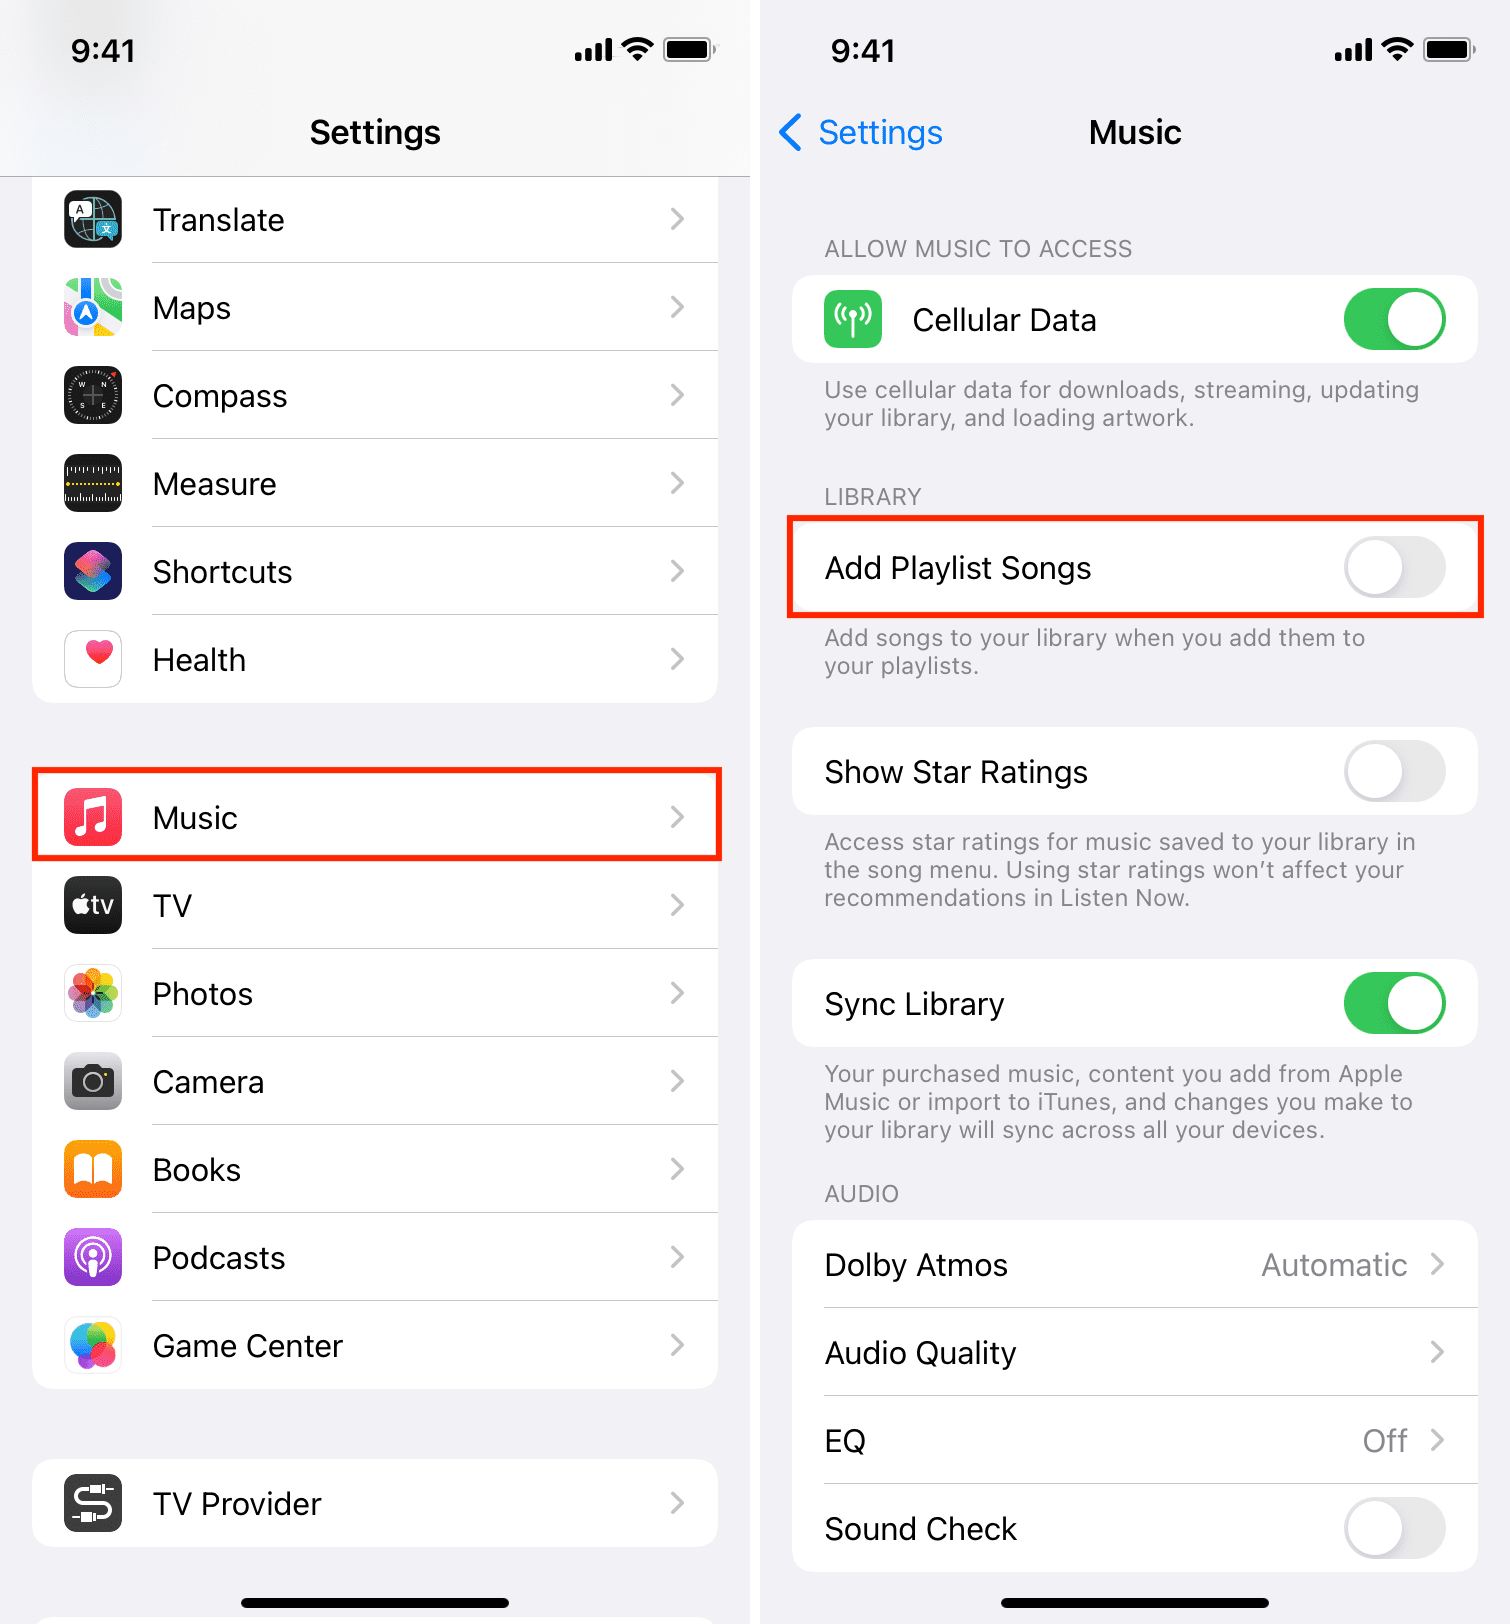 Add Playlist Songs in Music settings on iPhone